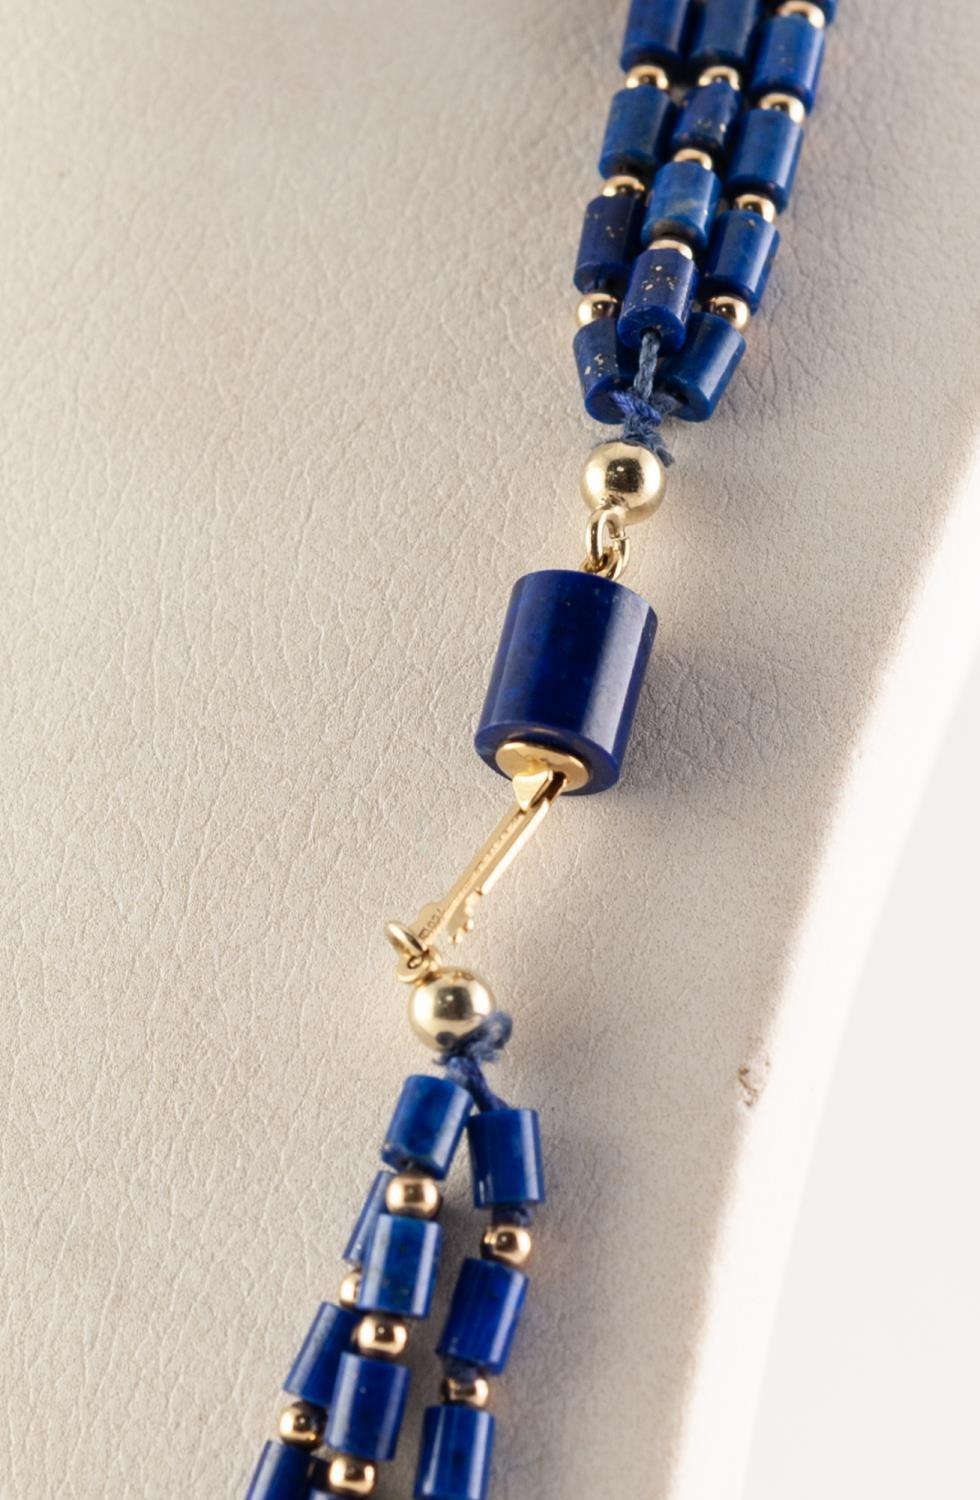 TRIPLE STRAND NECKLACE OF SMALL LAPIS LAZULI BUGLE BEADS with tiny gold coloured metal bead spacers, - Image 2 of 2